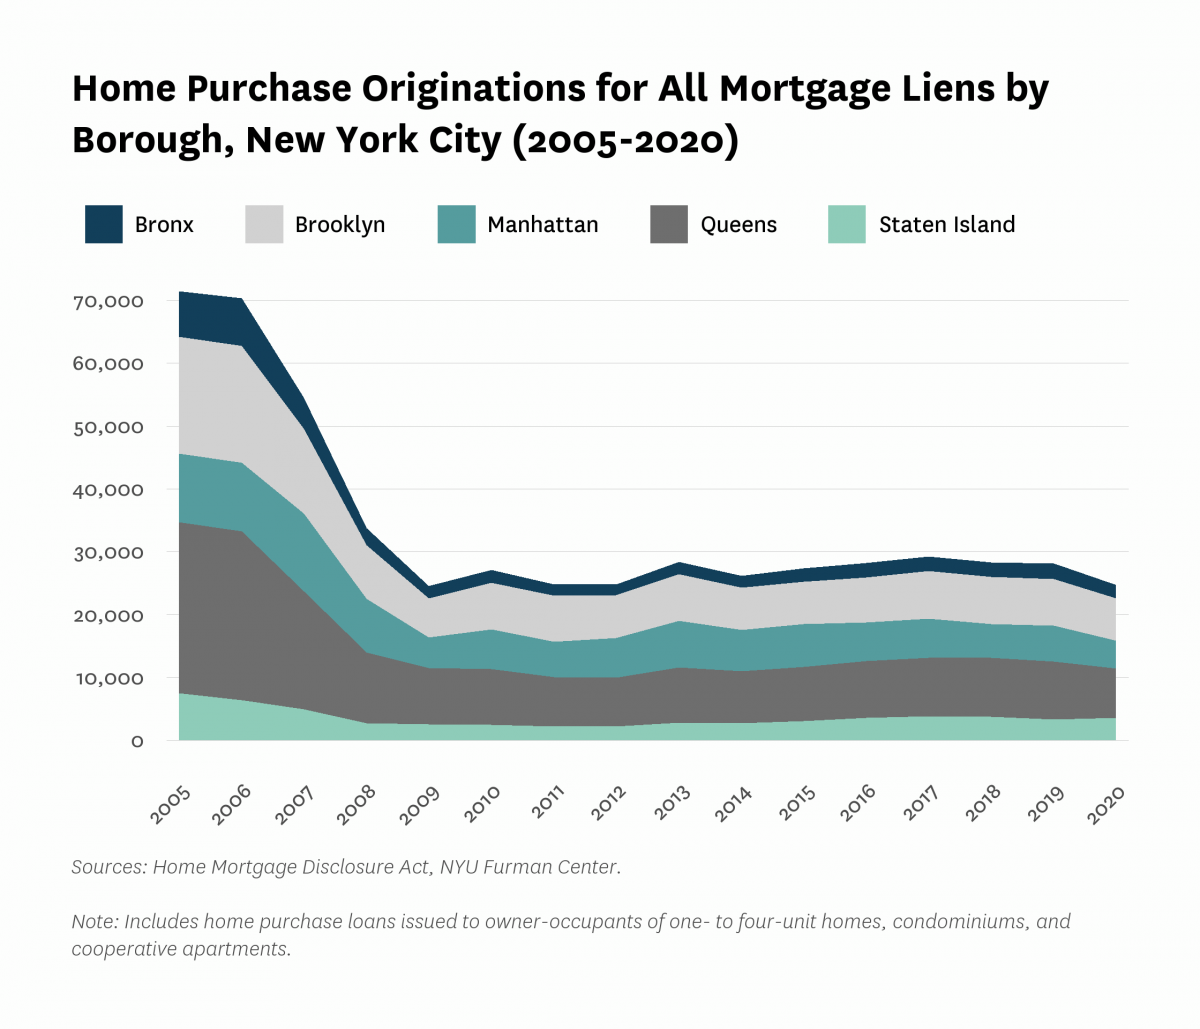 Area chart showing home purchase originations for all mortgage liens by borough in New York City from 2005 to 2020.